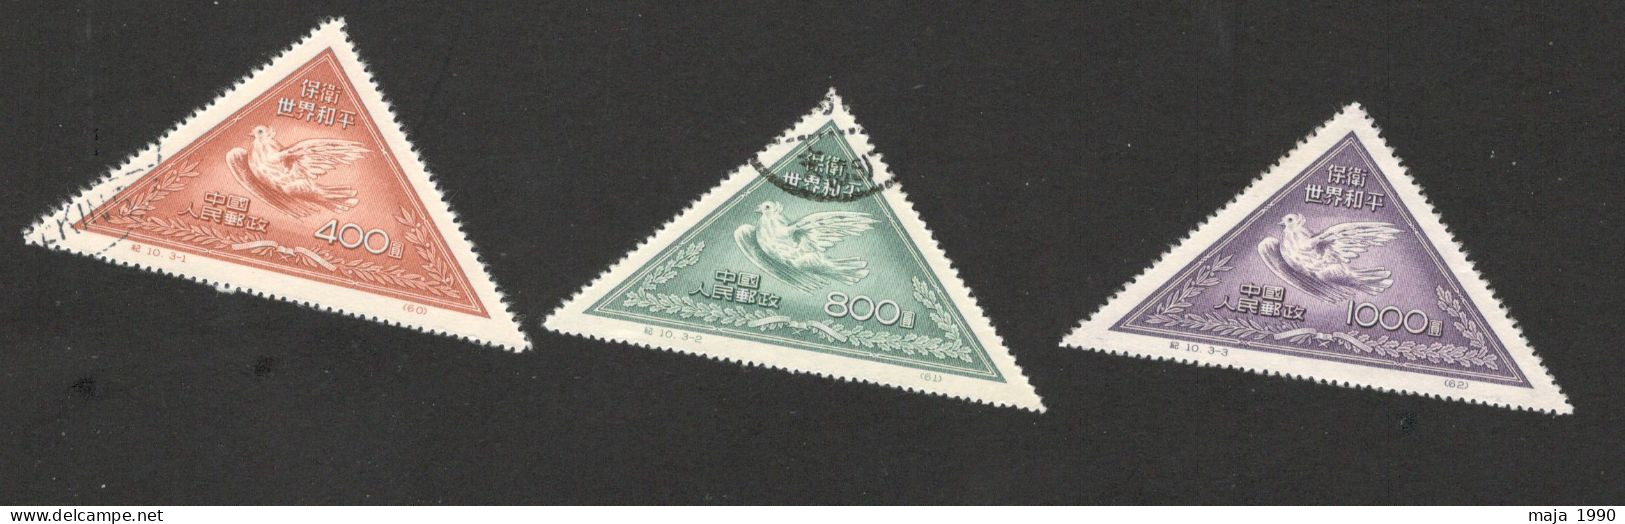 CHINA - USED/MNG SET- PEACE CAMPAIGN - 1951. - Oblitérés